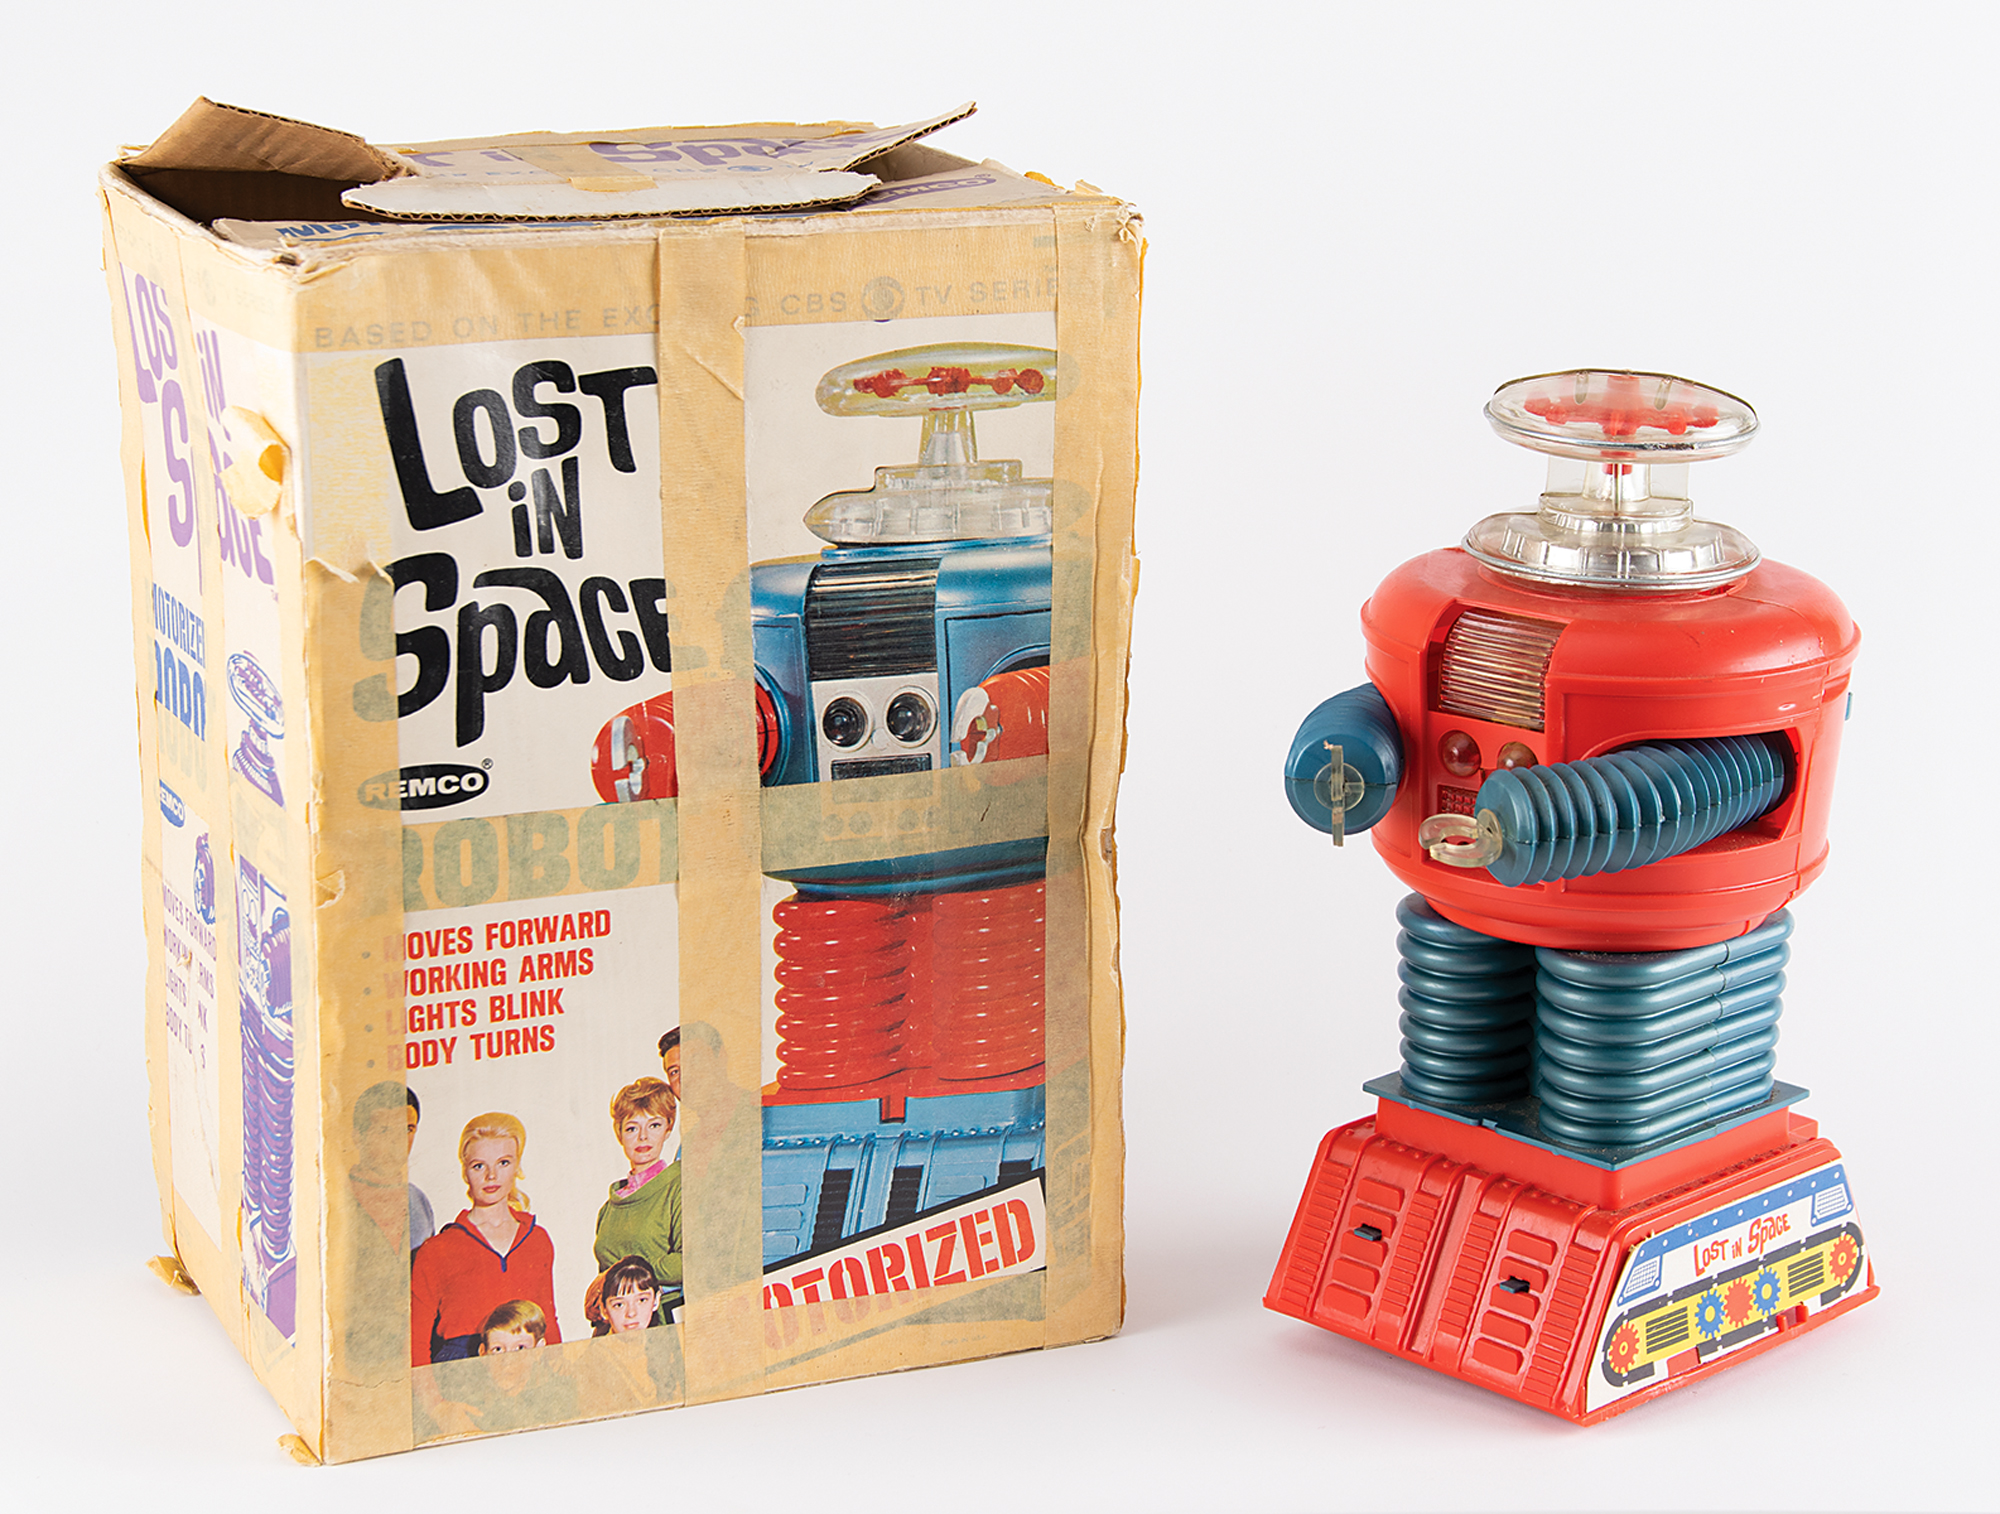 Lot #205 Vintage Lost In Space Motorized Robot by Remco from the collection of Andres Serrano